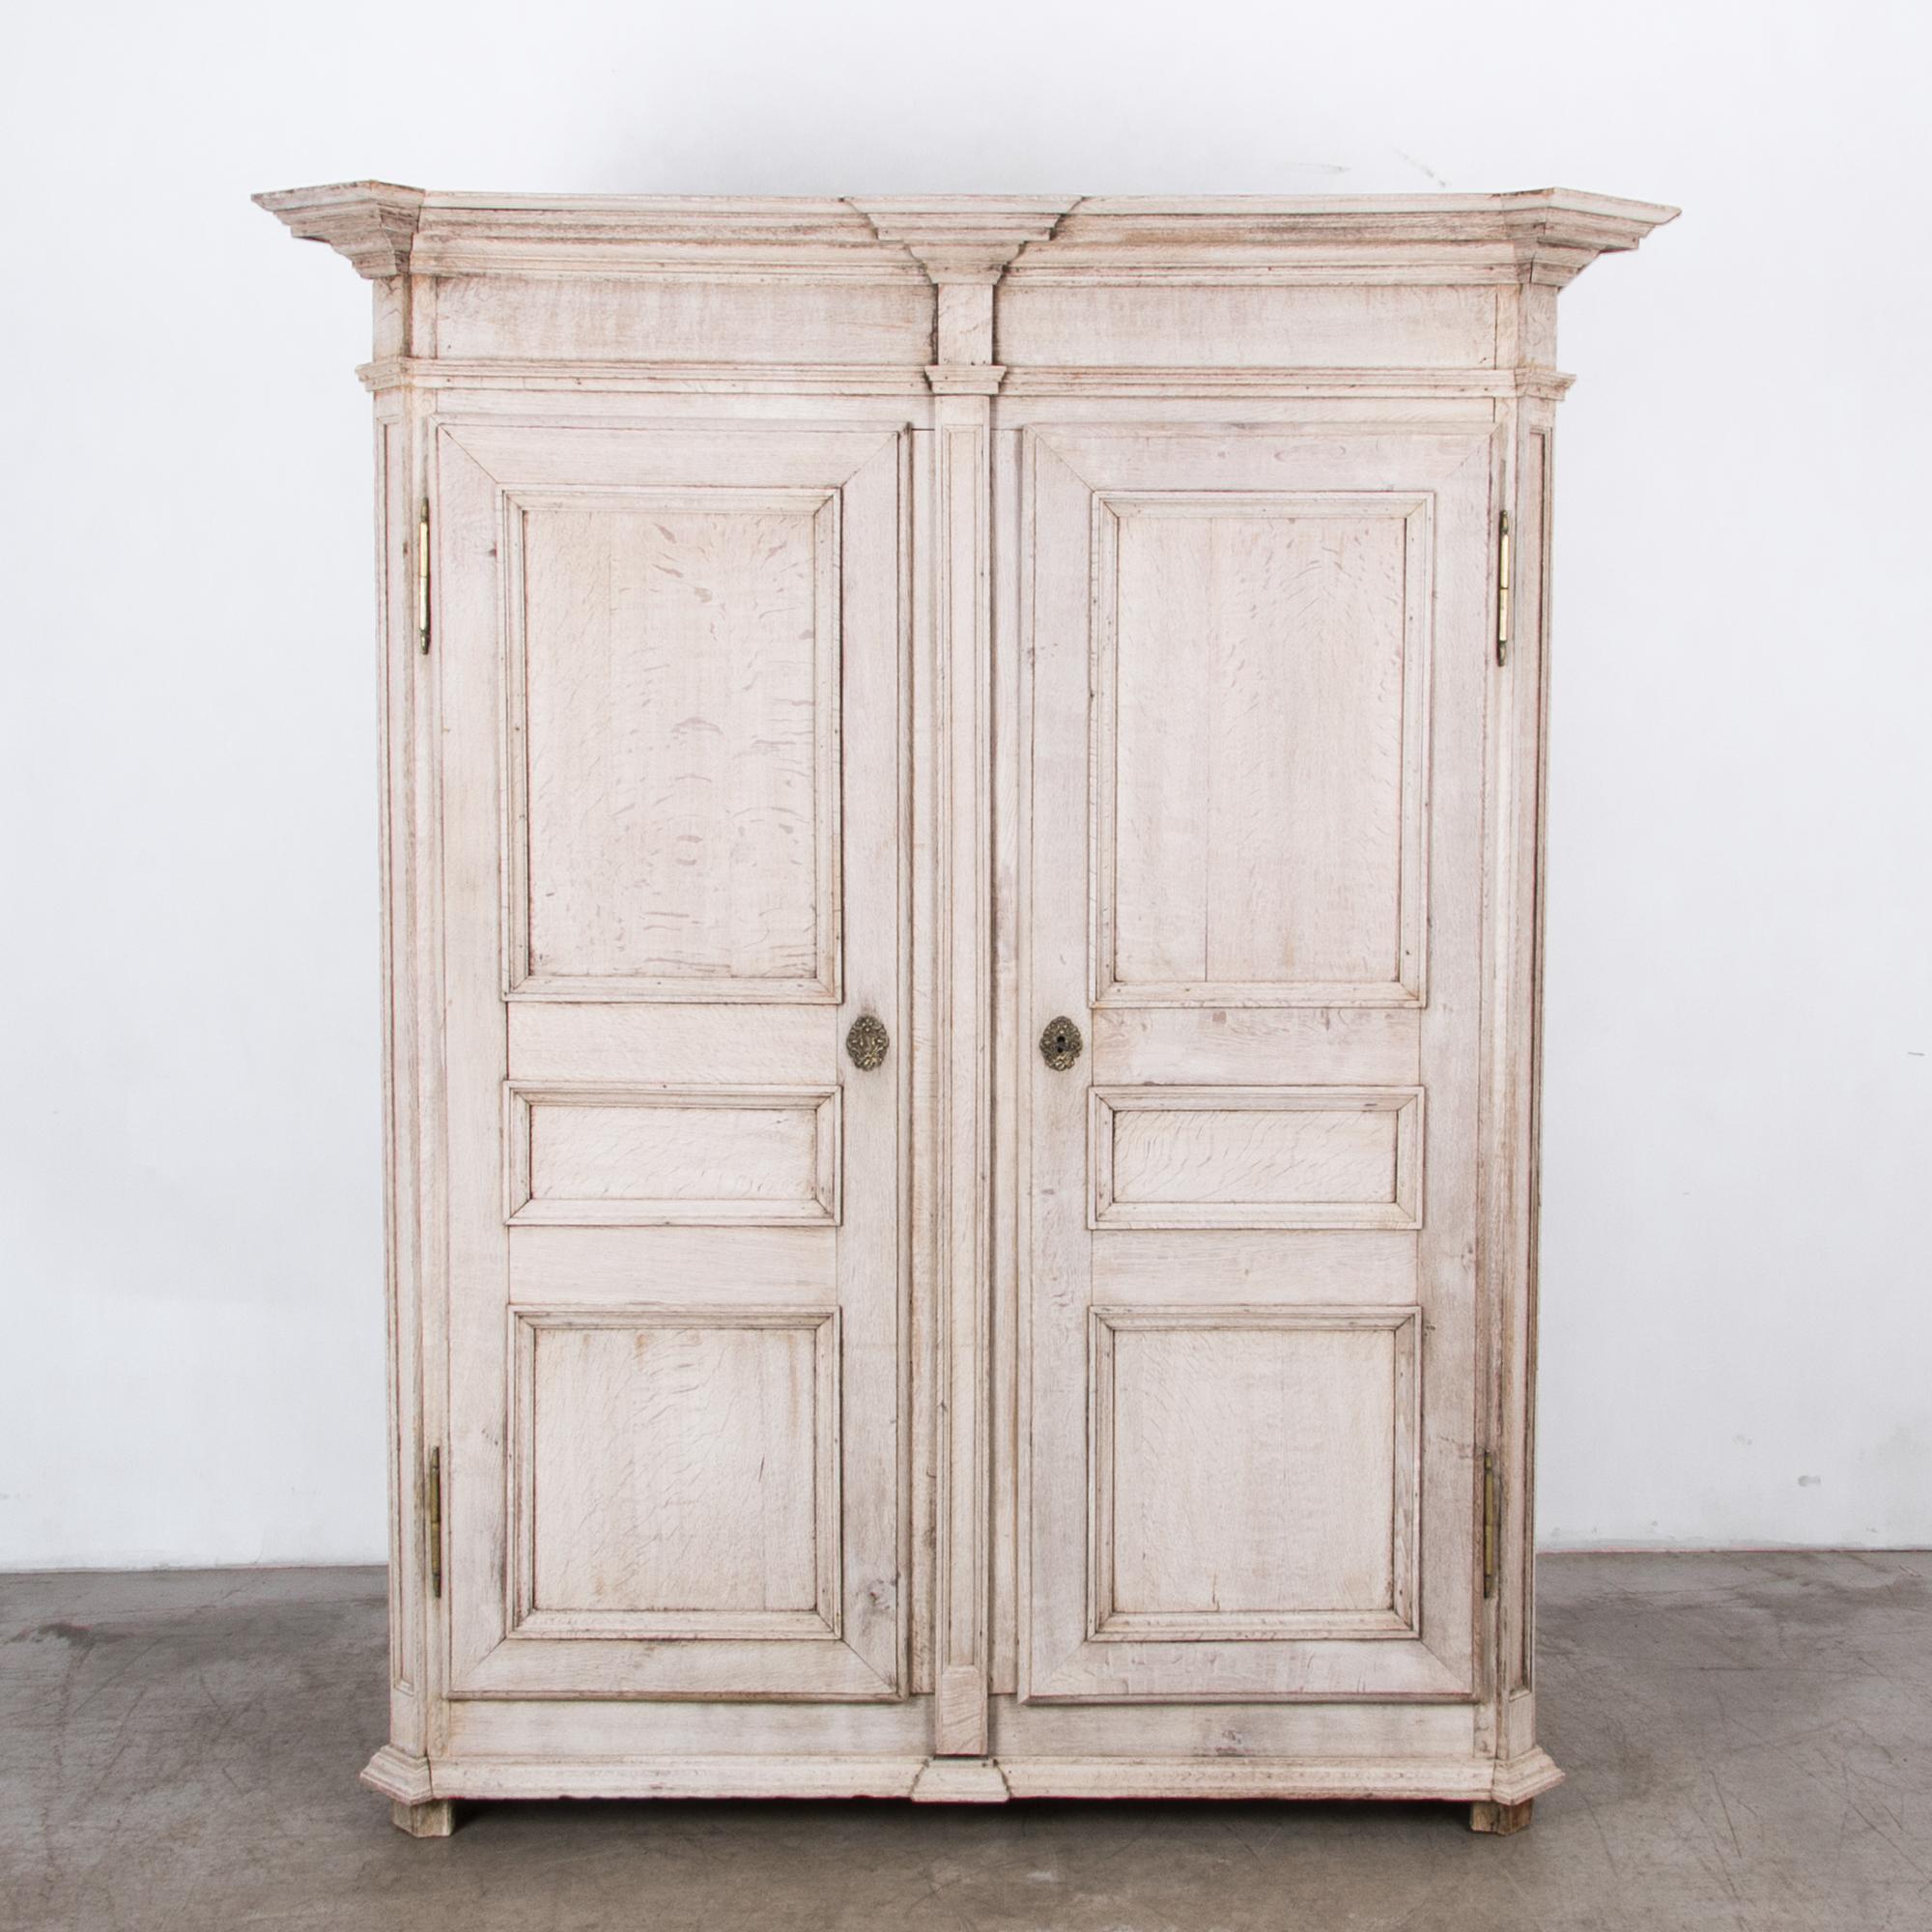 An early 19th century Belgian cabinet from the Narmur region. These distinctive cabinets, with large mouldings and dignified geometric forms, are a regional style influenced by the tradition of French formal furniture. A distinctive light finish